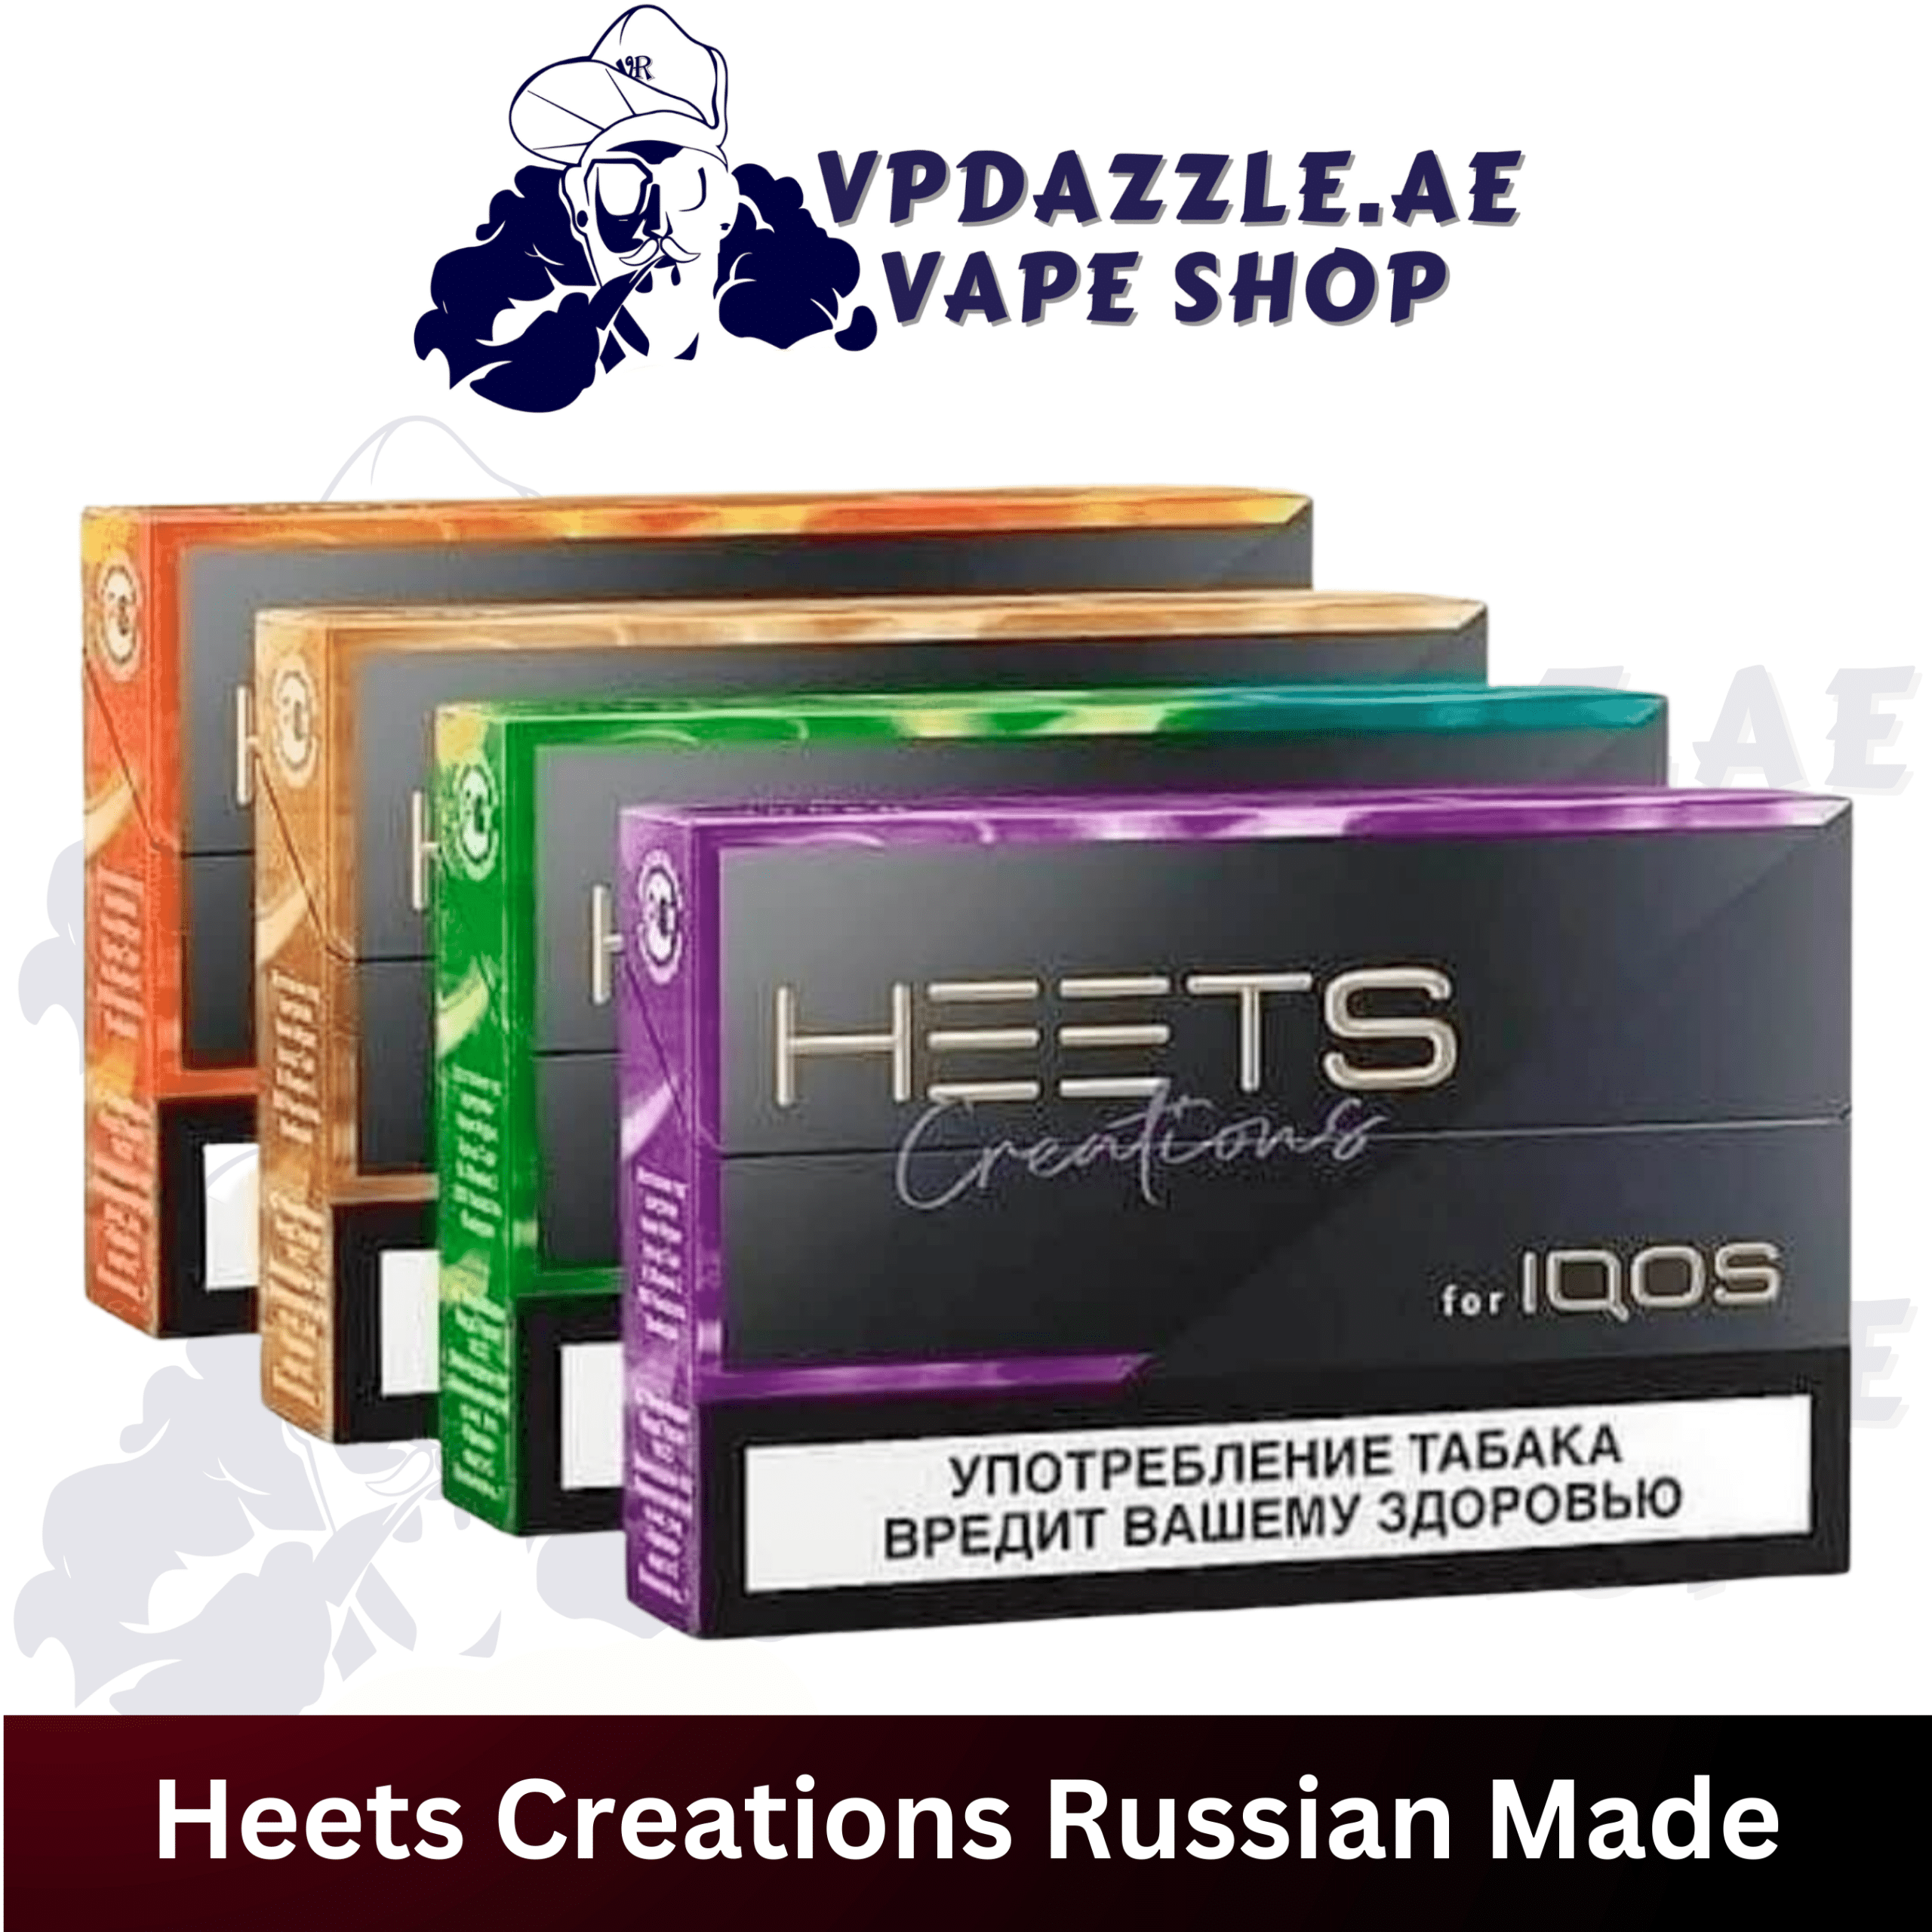 HEETS CREATIONS RUSSIAN EDITION-Vpdazzle AE